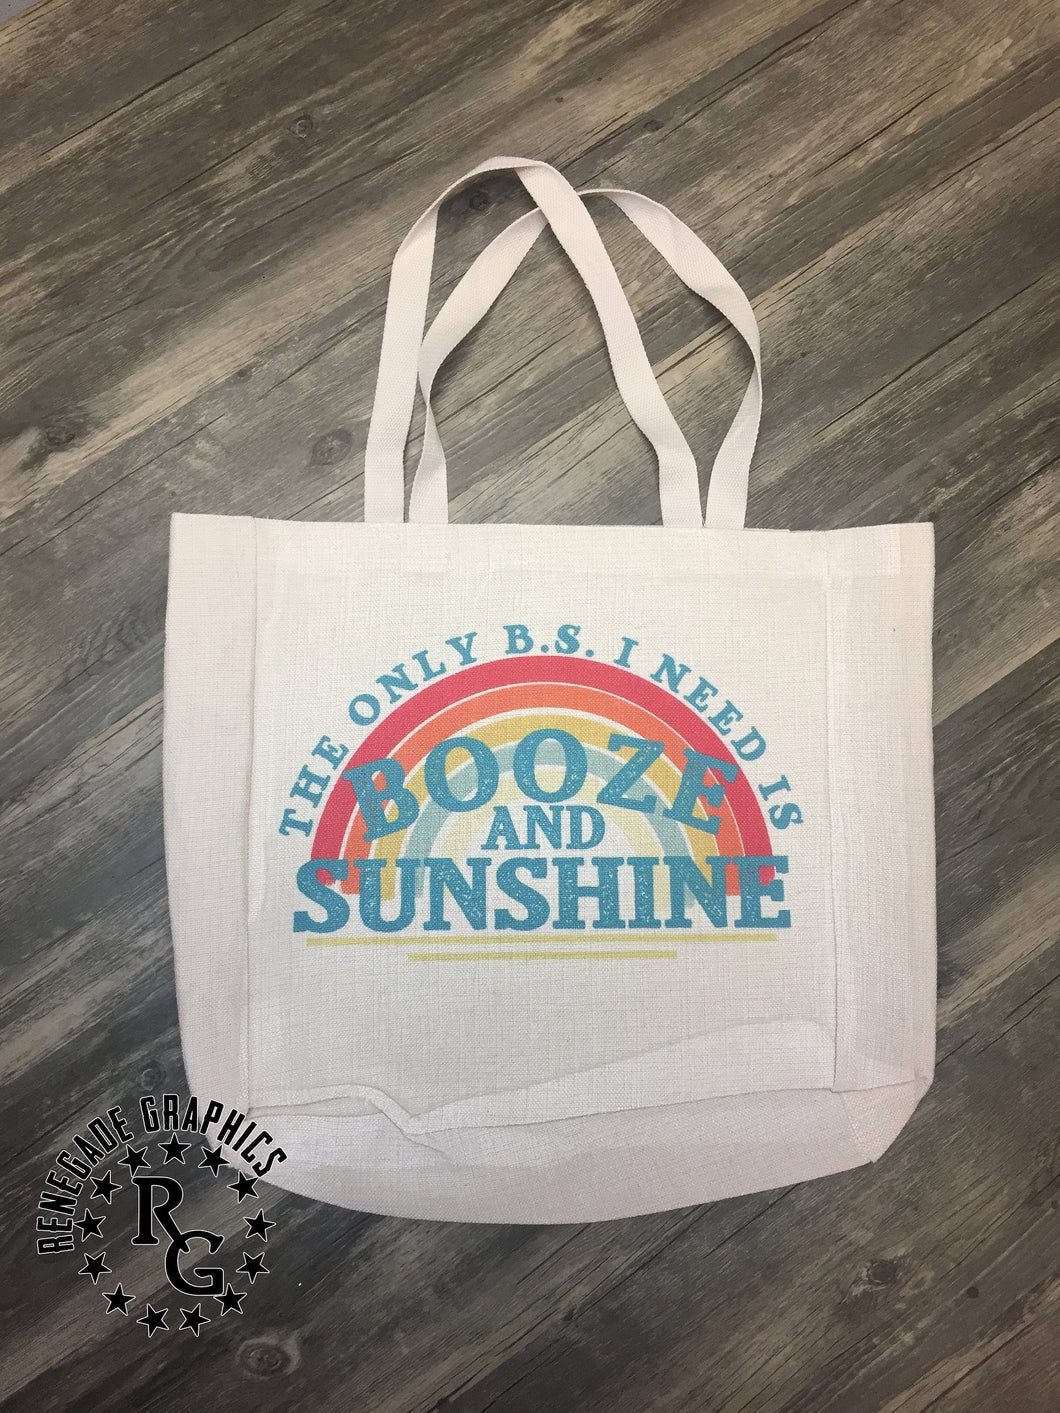 The Only B.S. I Need Is Booze & Sunshine | Canvas Tote Shopping Bag